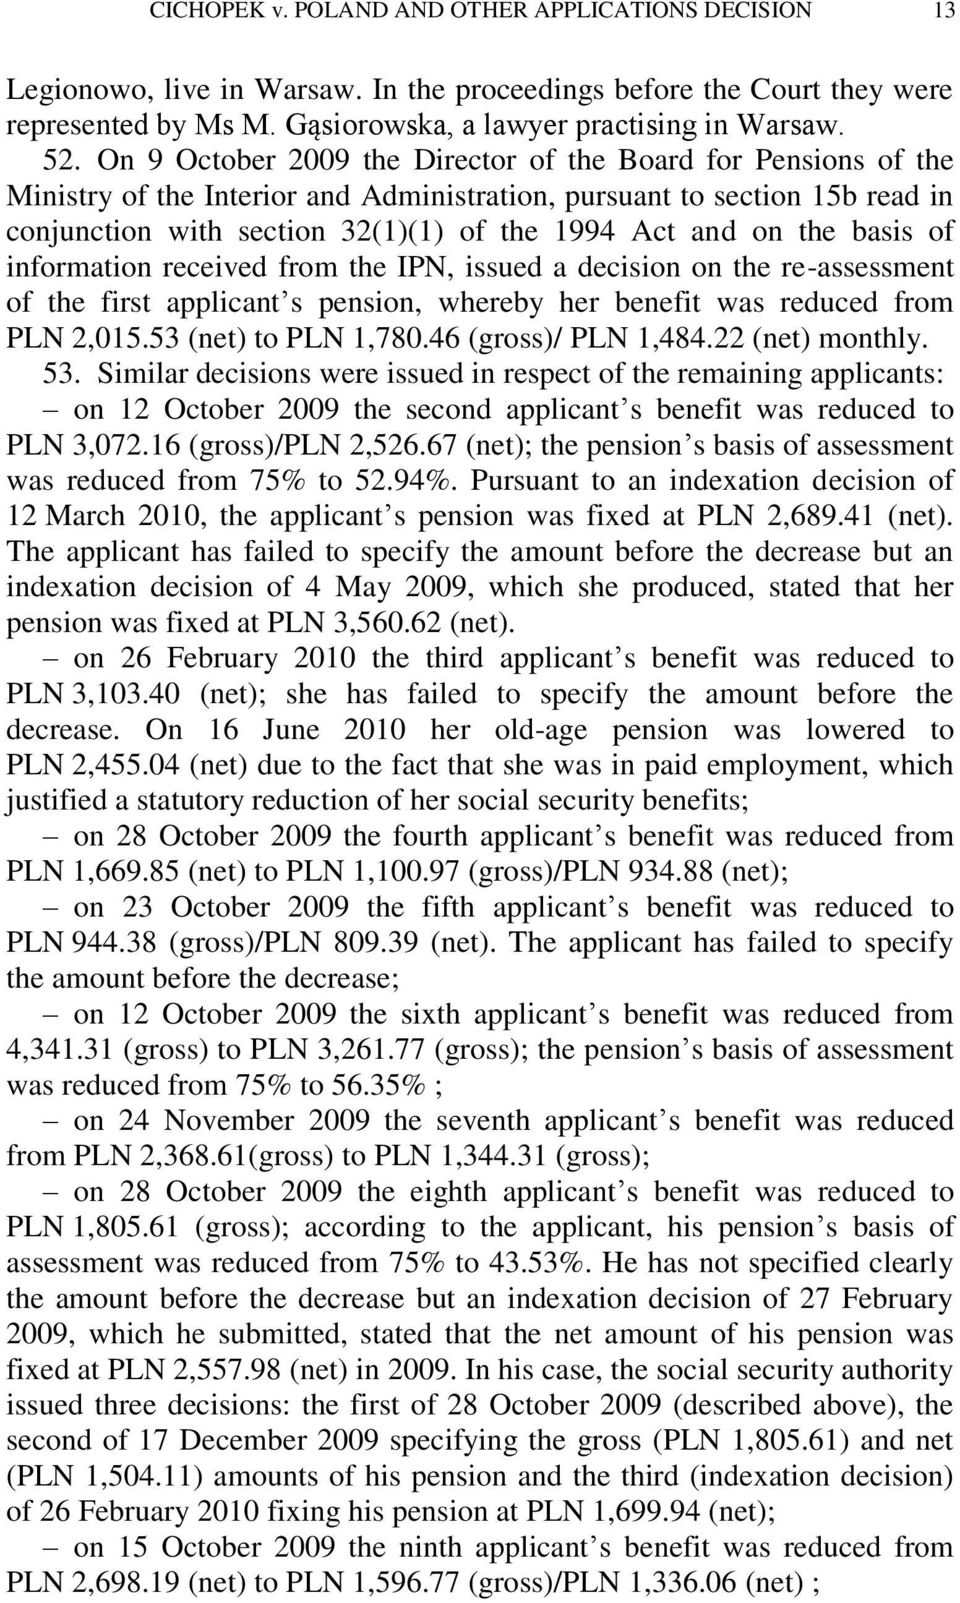 the basis of information received from the IPN, issued a decision on the re-assessment of the first applicant s pension, whereby her benefit was reduced from PLN 2,015.53 (net) to PLN 1,780.